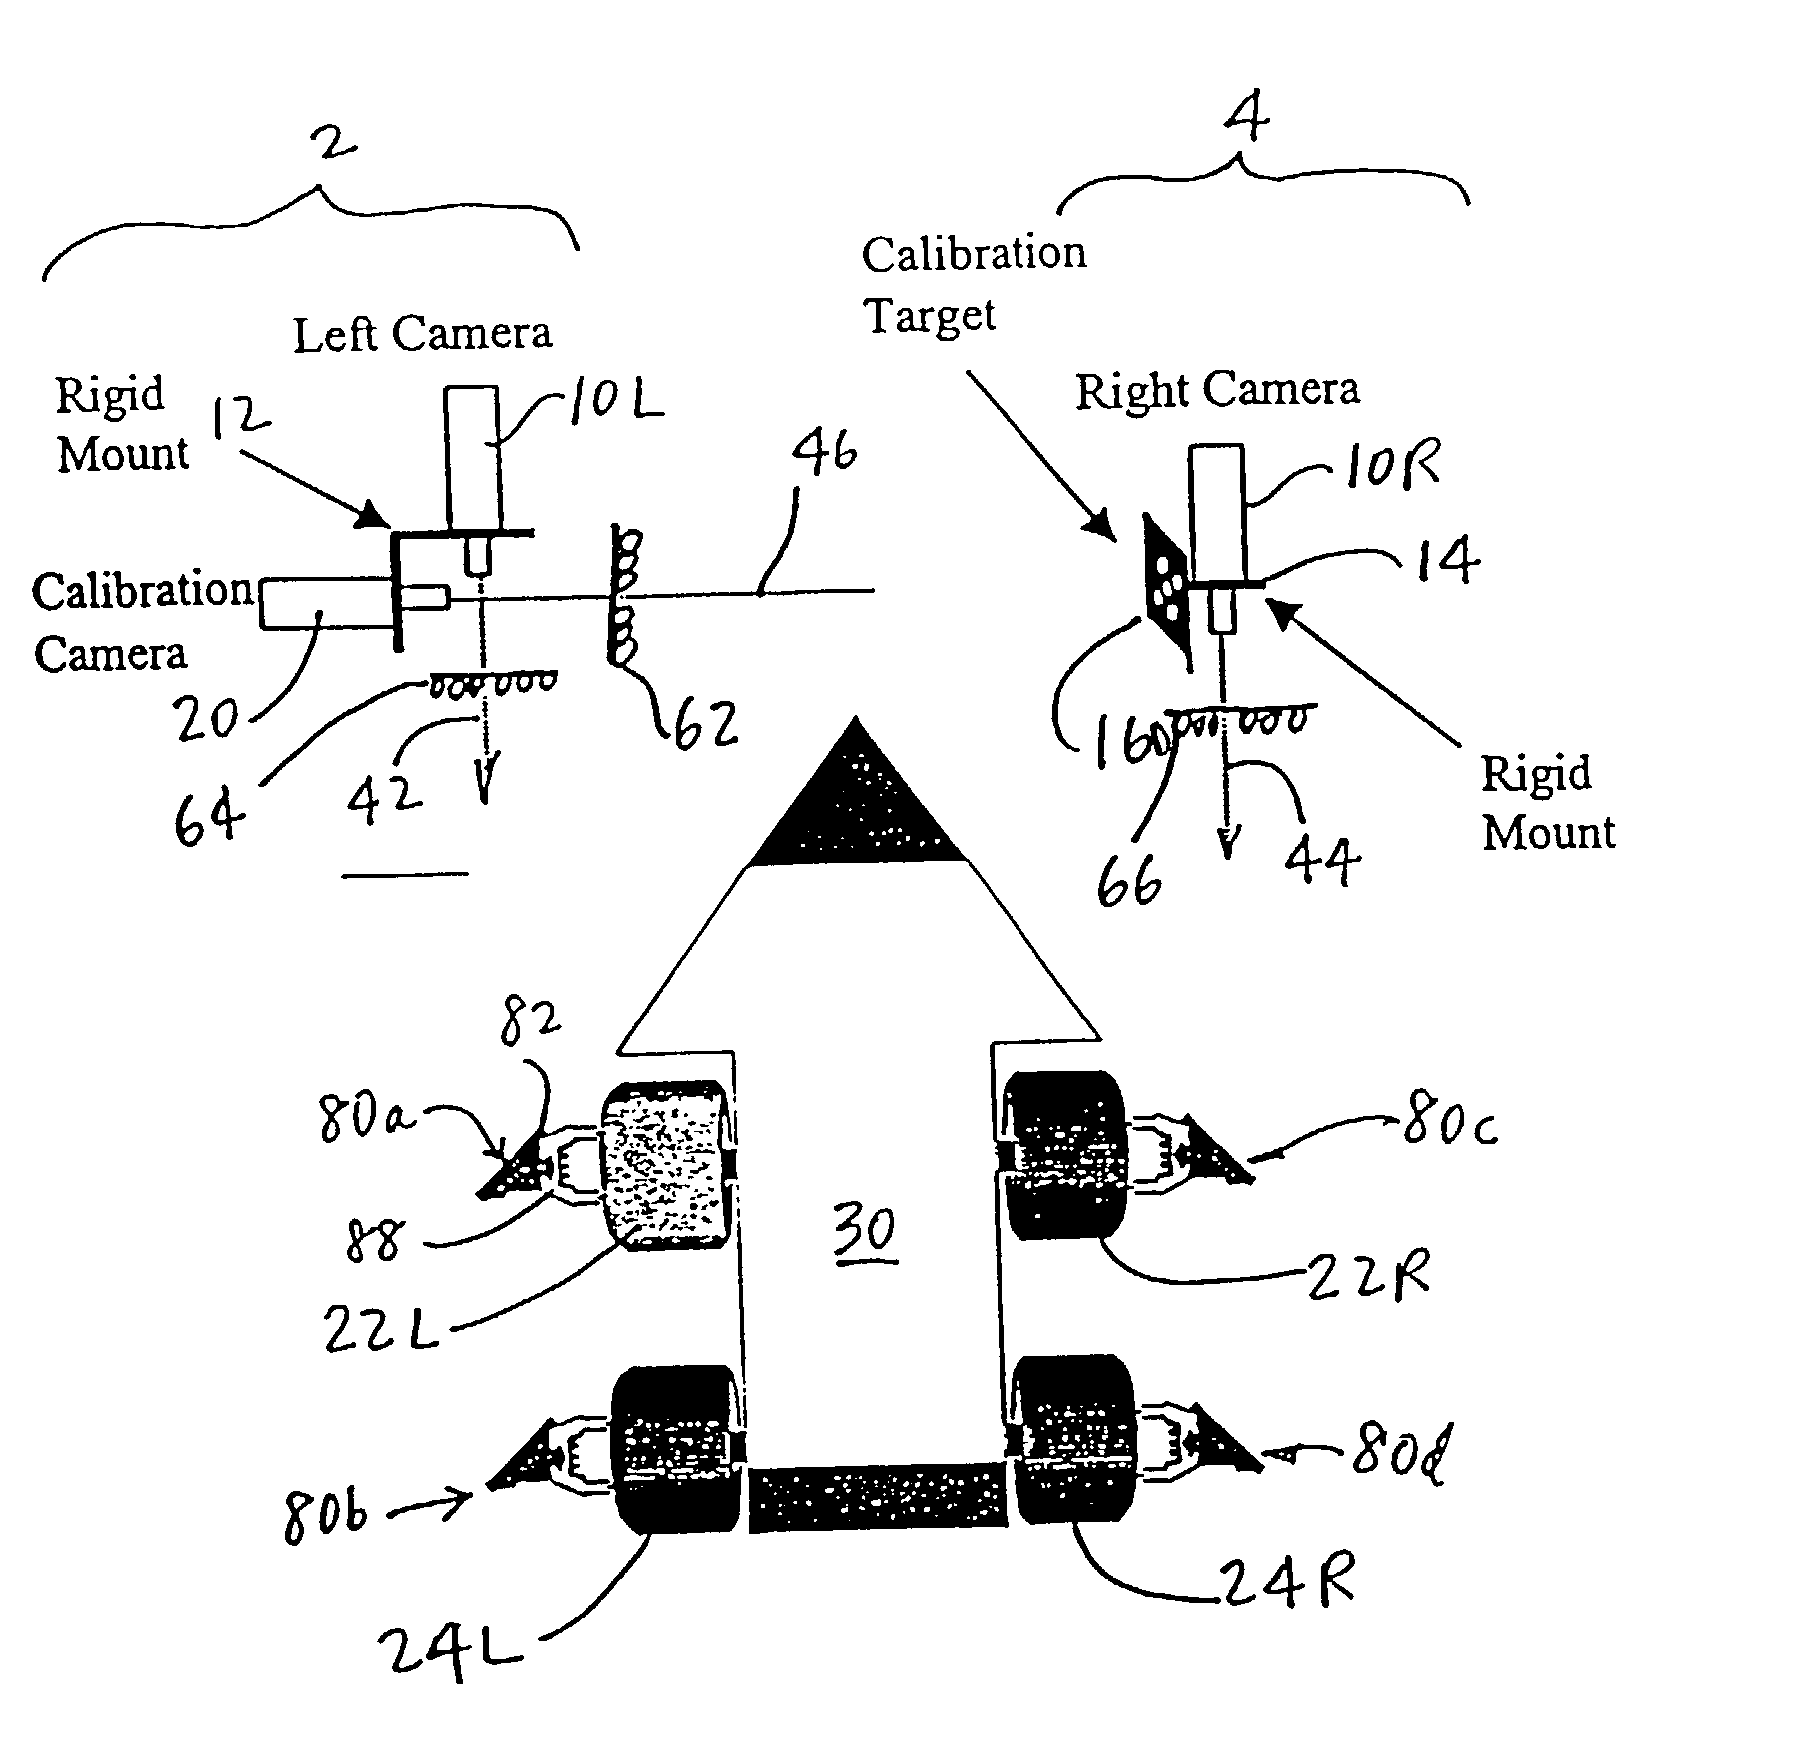 Self-calibrating position determination system